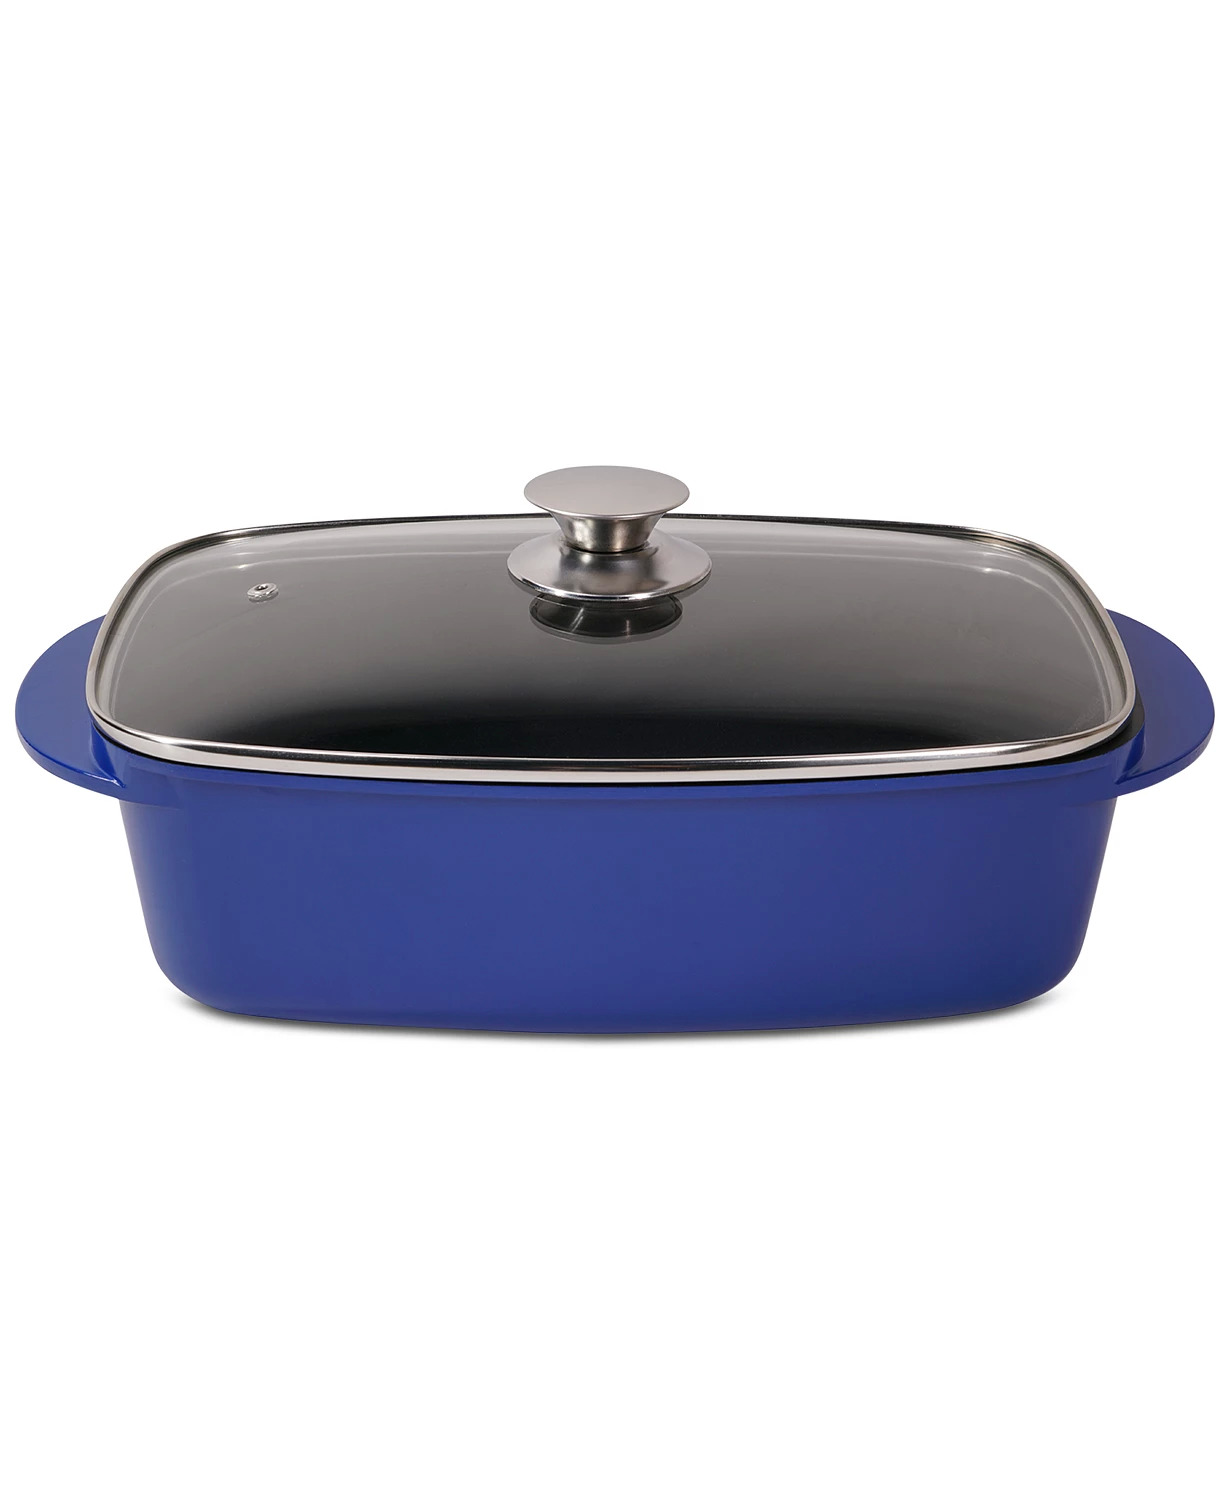 5.5-Quart Sedona Pro Aluminum Multi-Purpose Roaster w/ Lid (Blue or Red) $20 & More + SD Cashback + Free Store Pickup at Macy's or FS on $25+